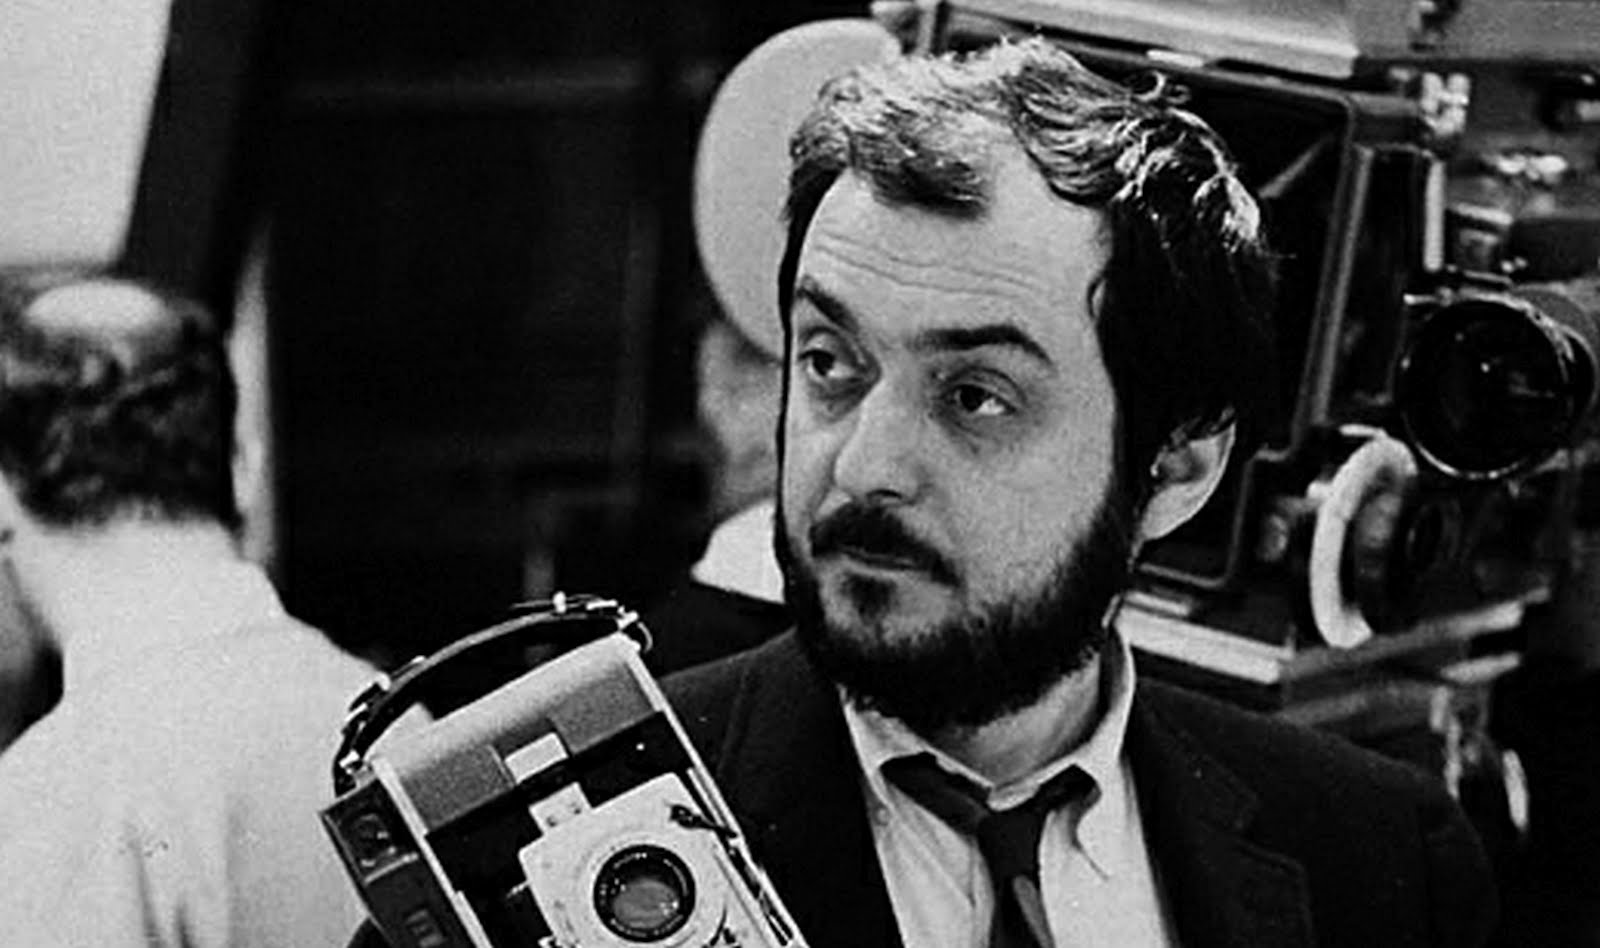 stanley kubrick films movies full metal jacket director producer phobia flying